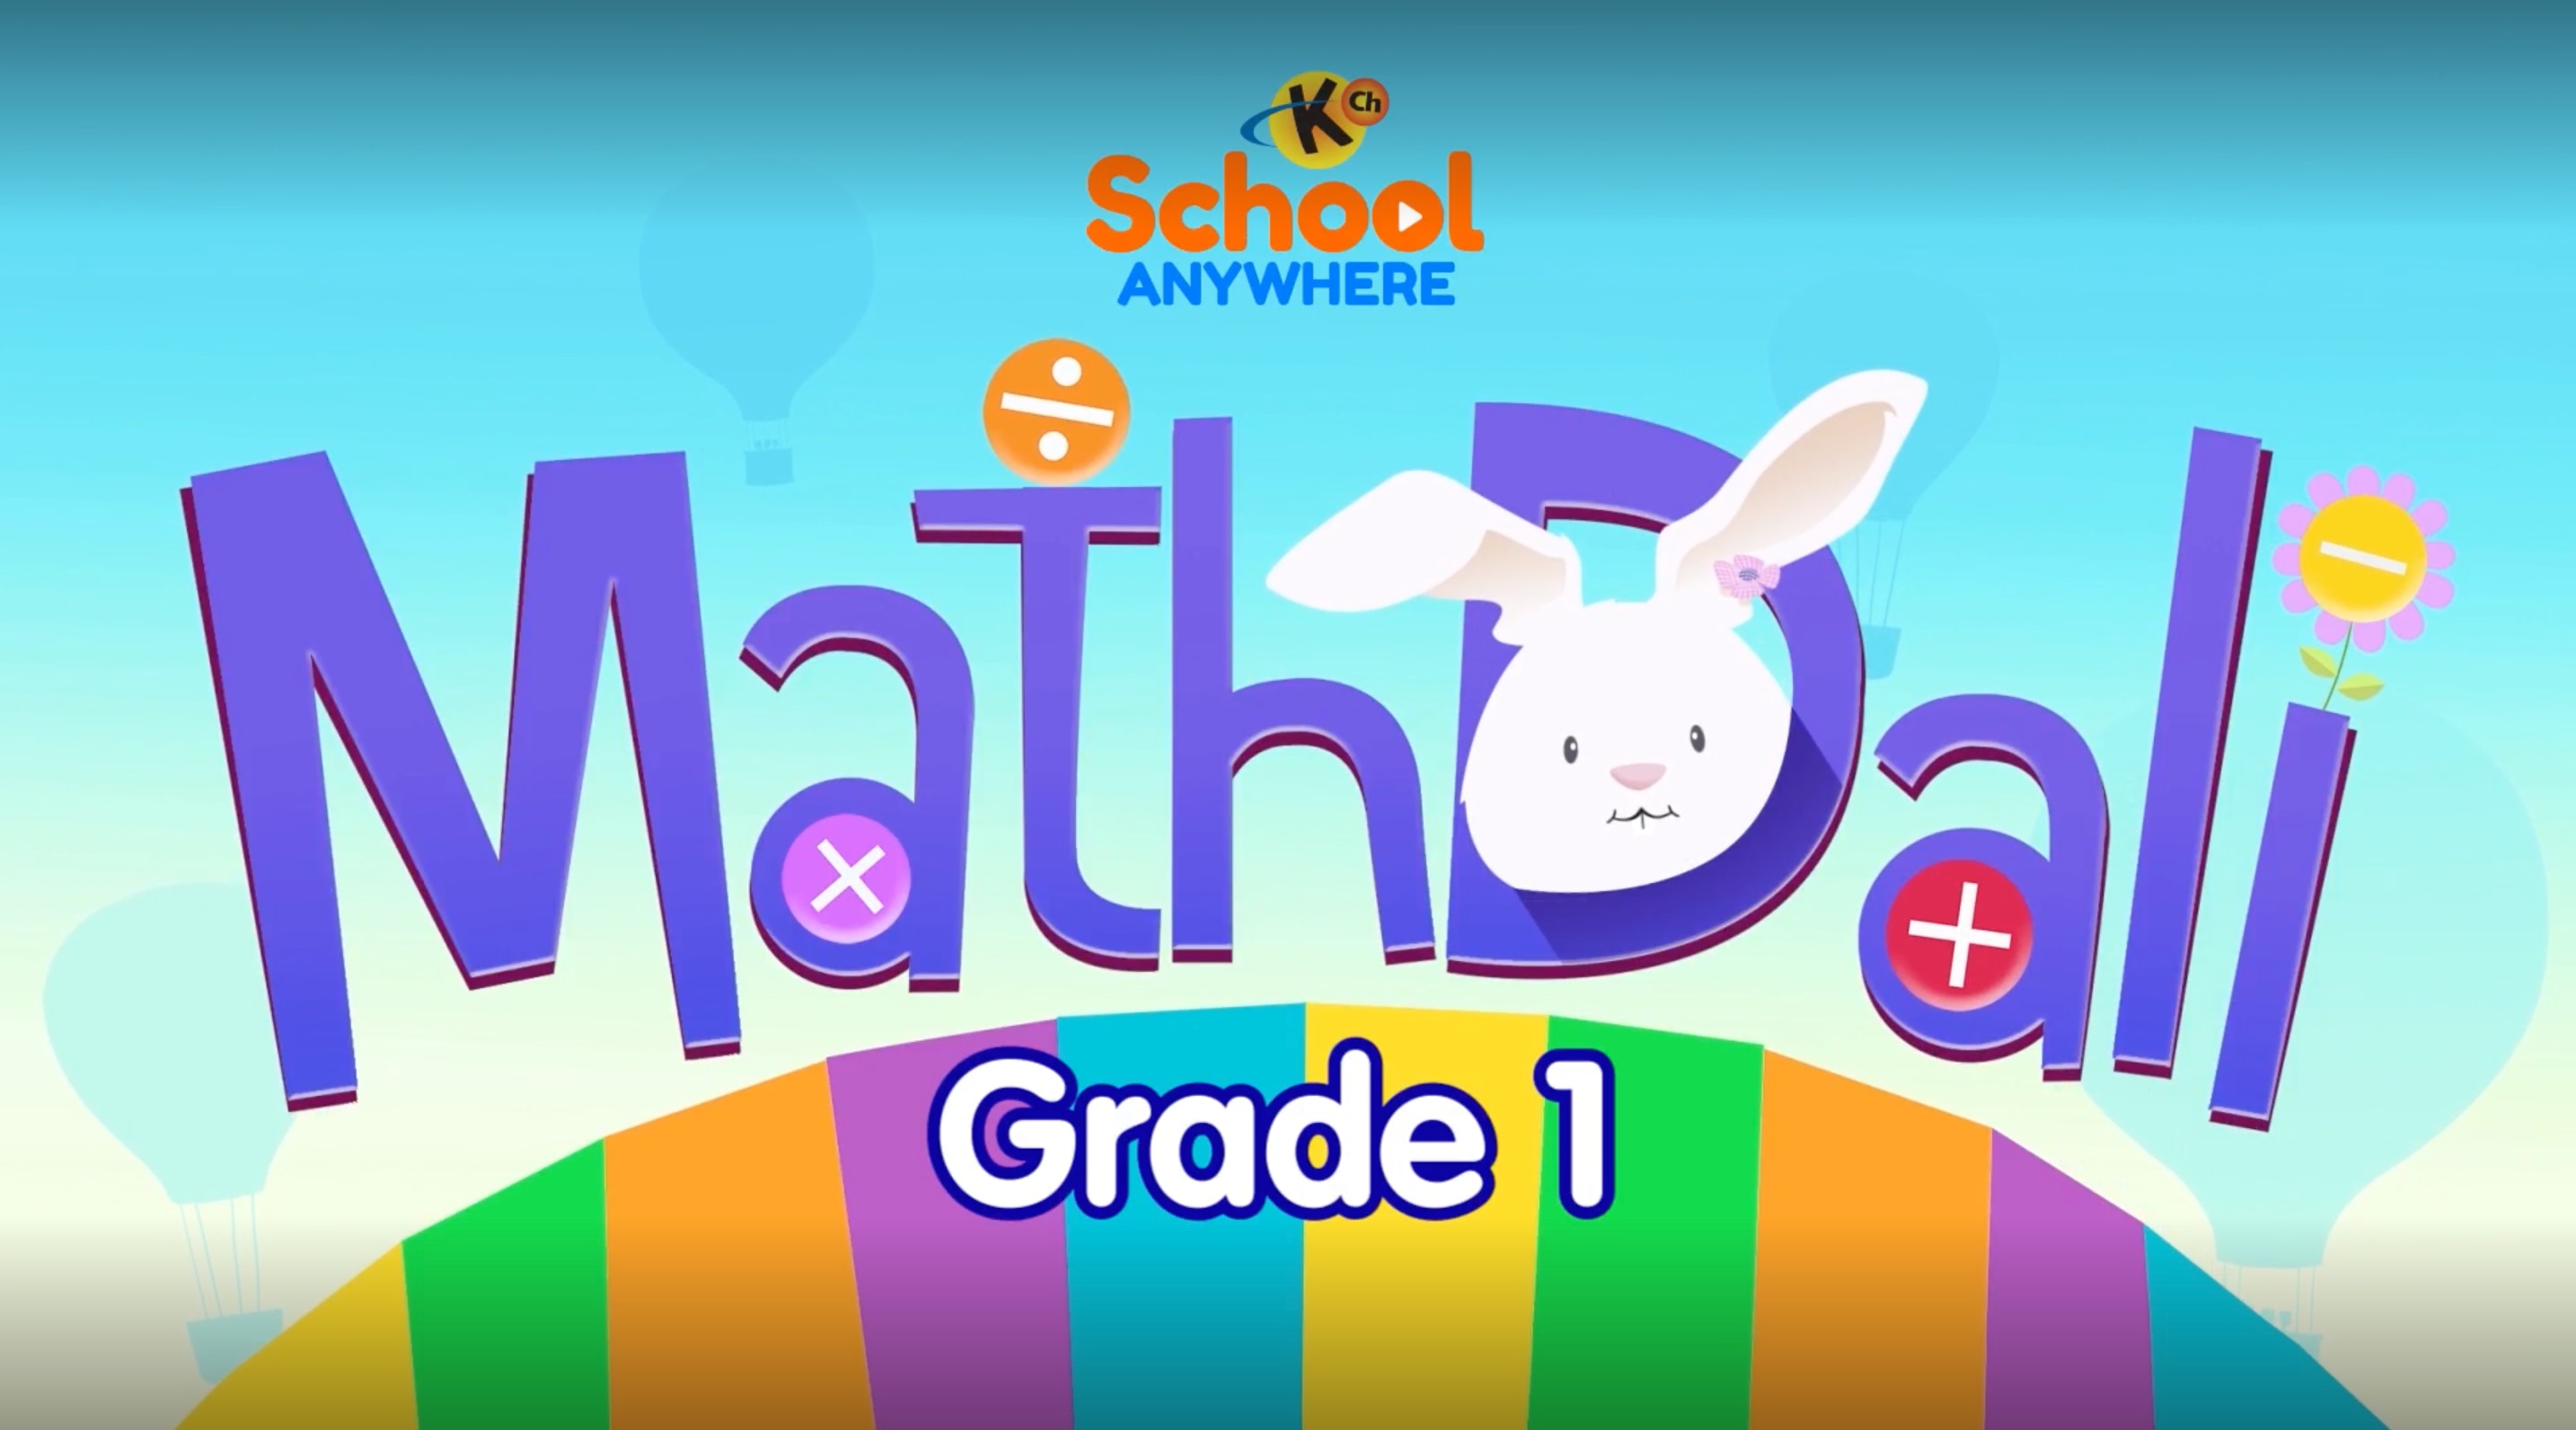 Knowledge Channel airs new episode of "Mathdali" with Robi Domingo